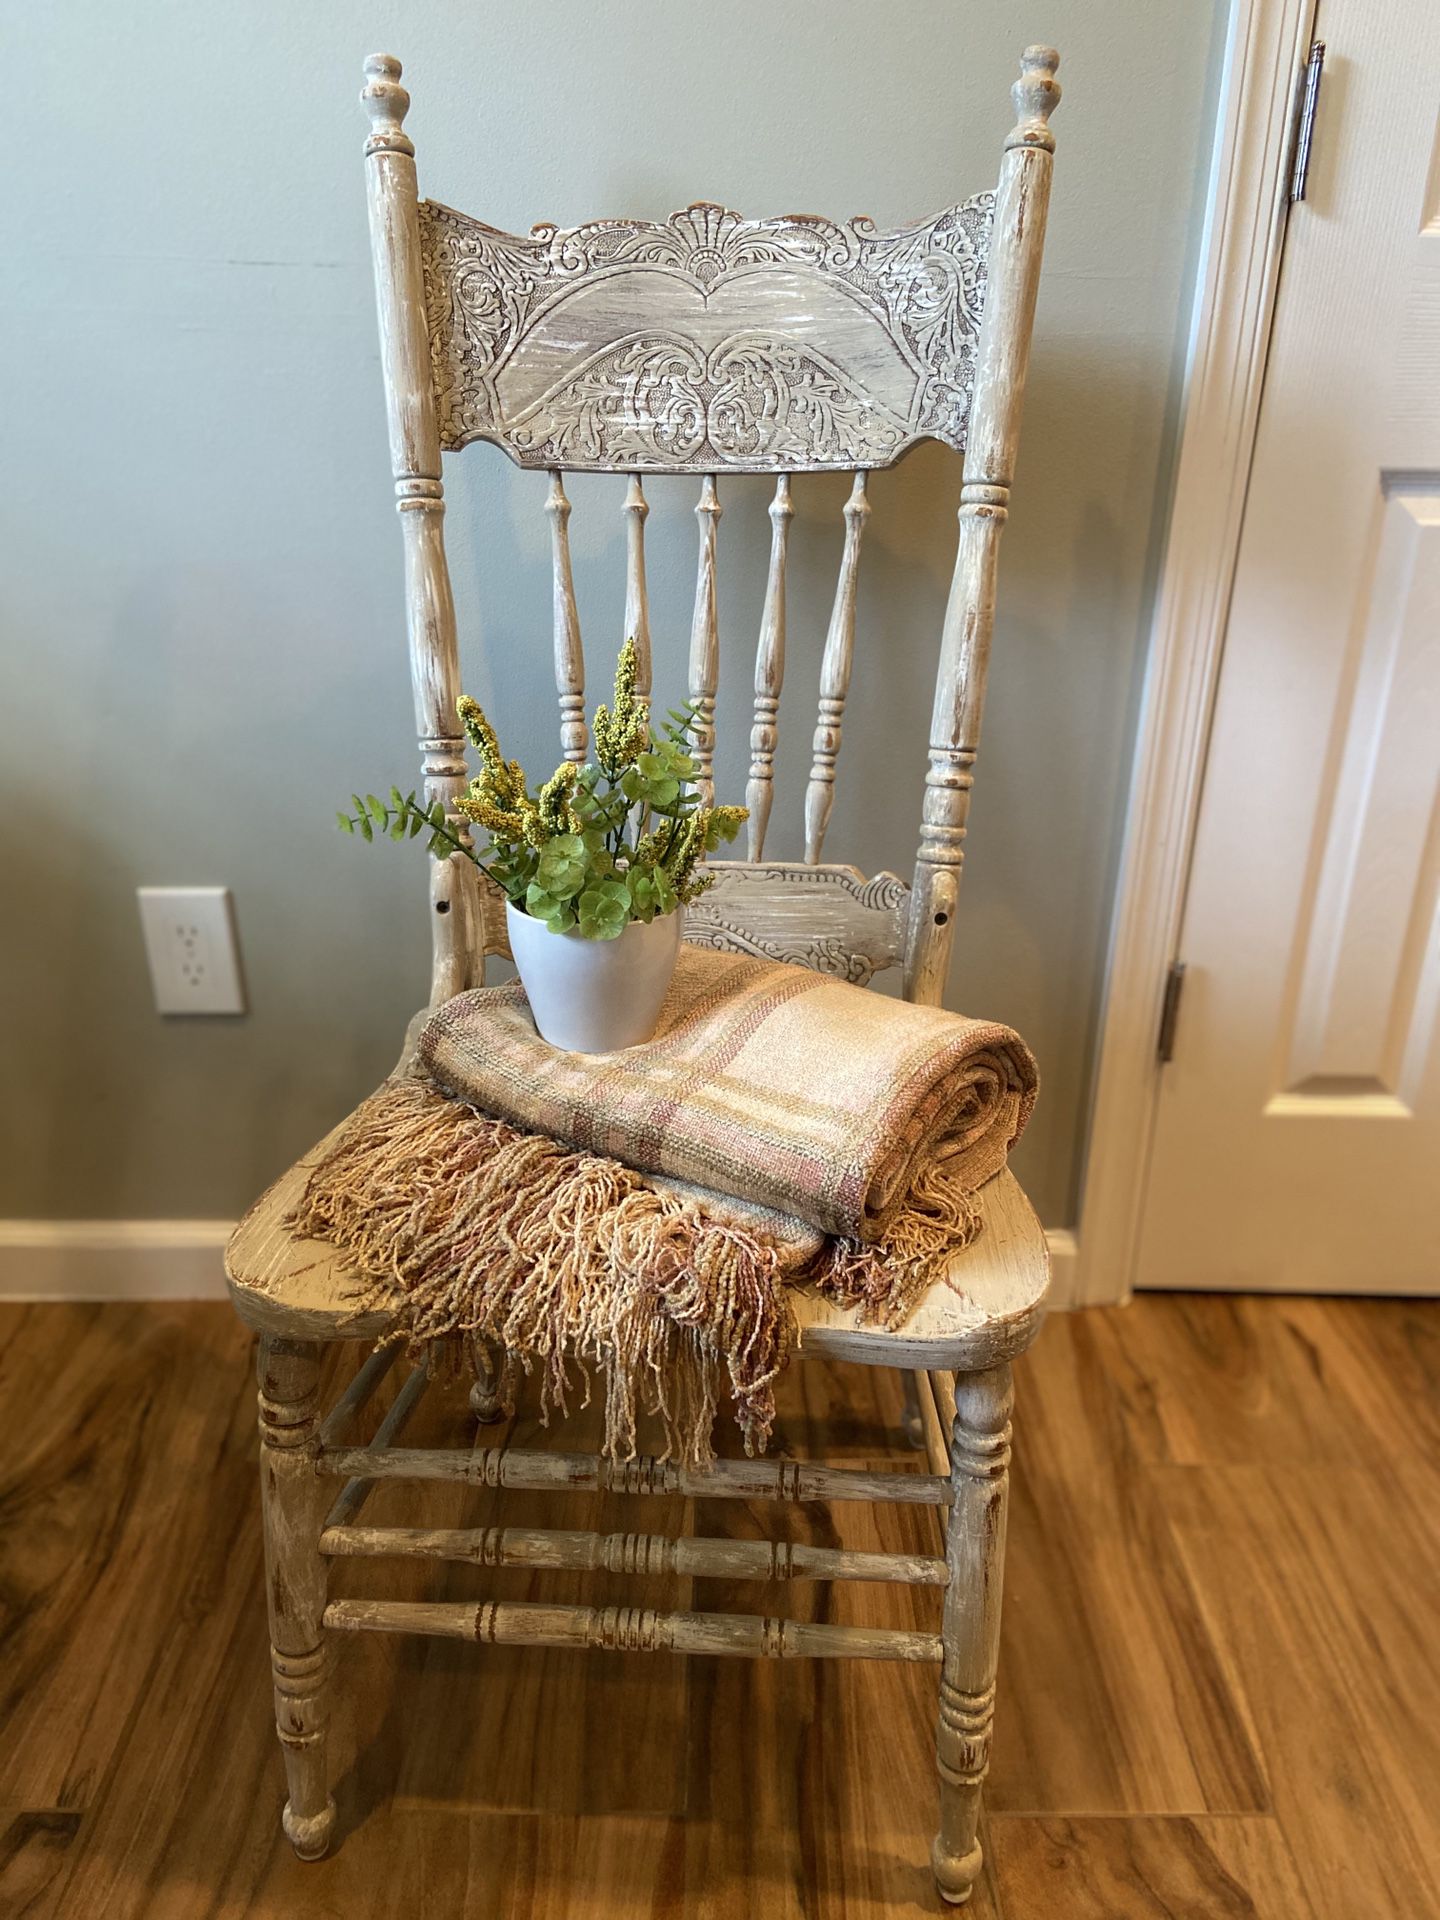 Shabby Chic/ Antique Look Wood Chair